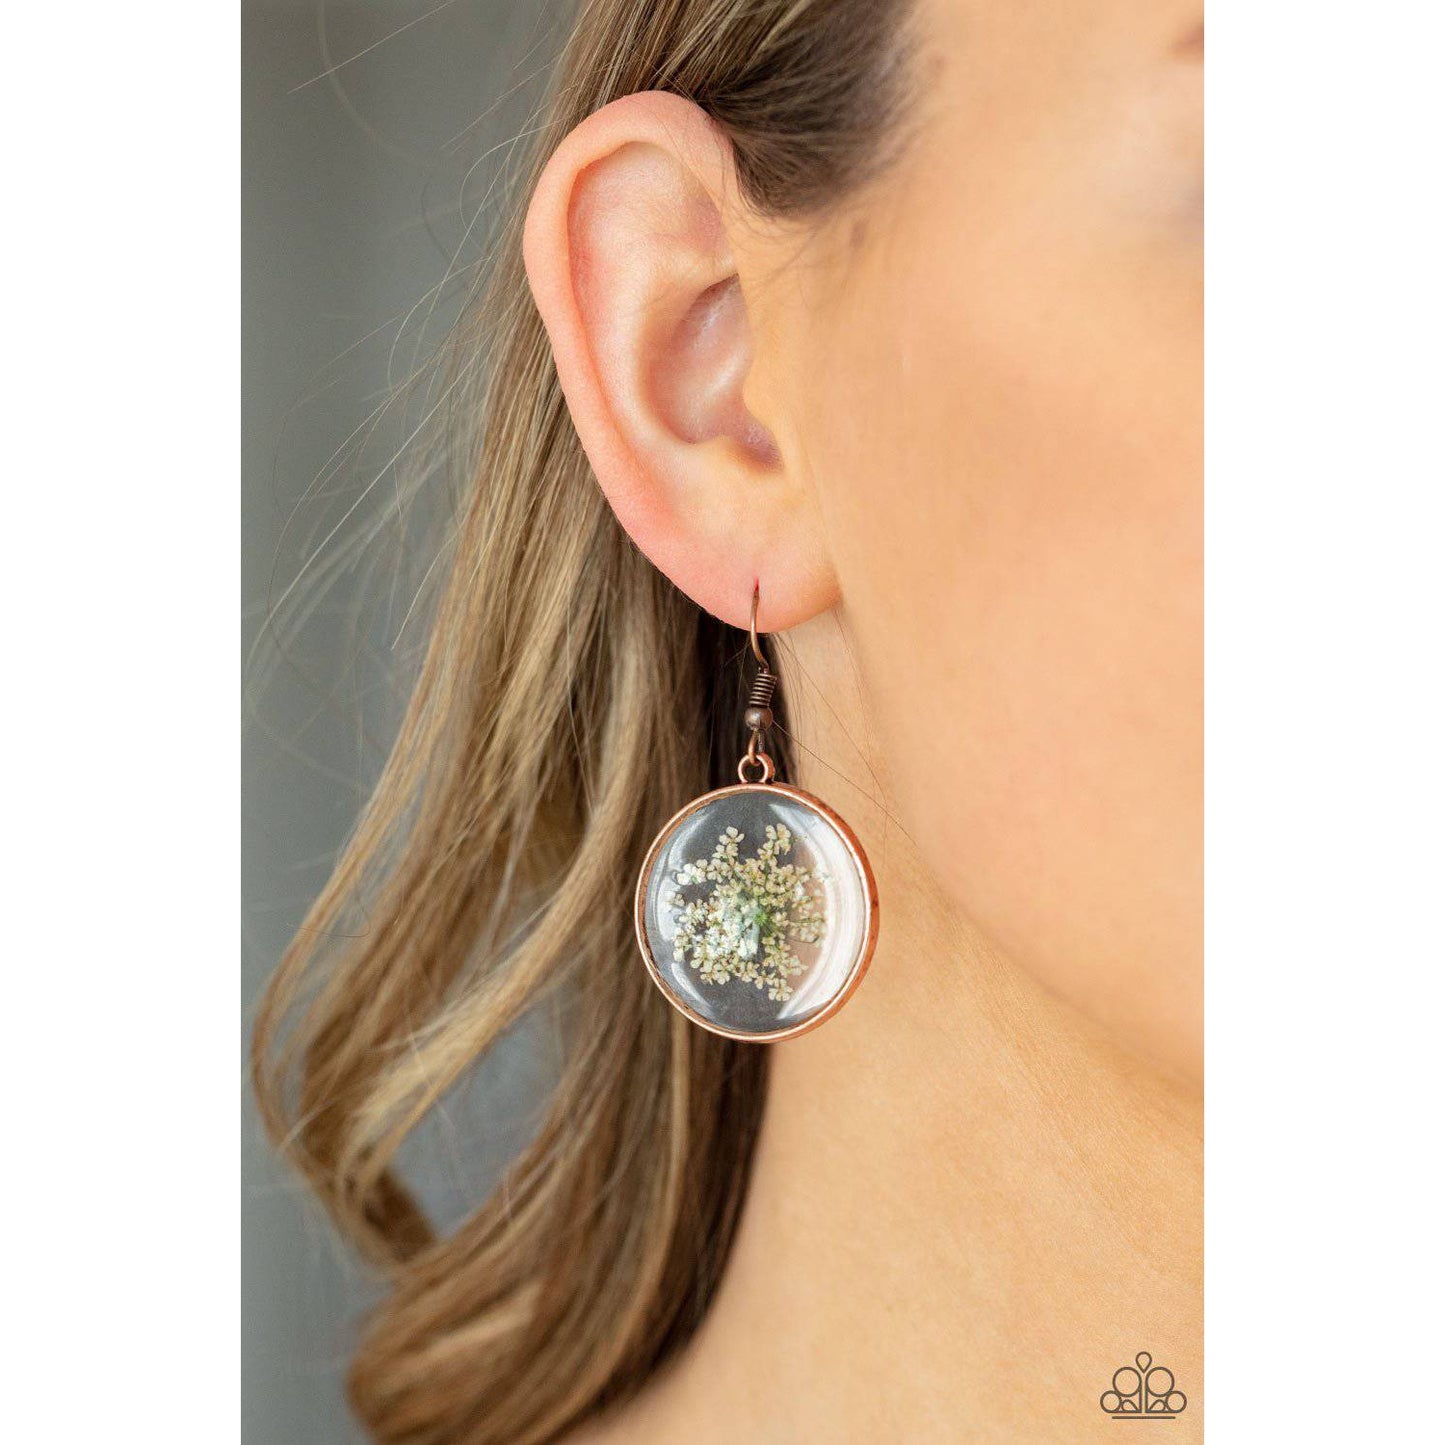 Happily Ever Eden - Copper Flower Earrings - Paparazzi Accessories - GlaMarous Titi Jewels